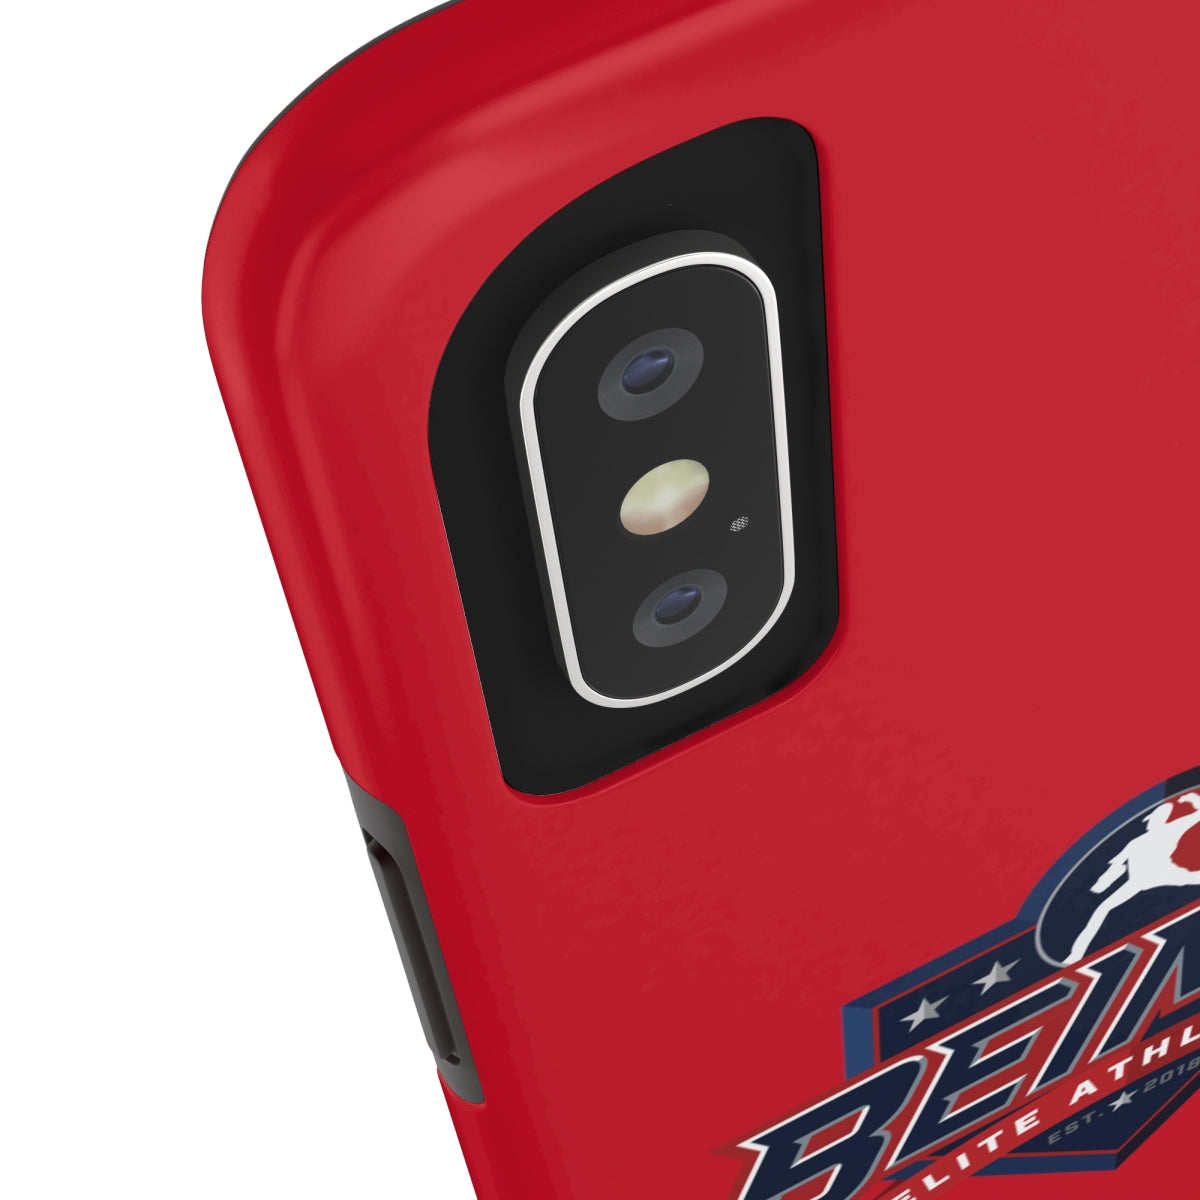 Tough Phone Cases, Case-Mate Red, White & blue